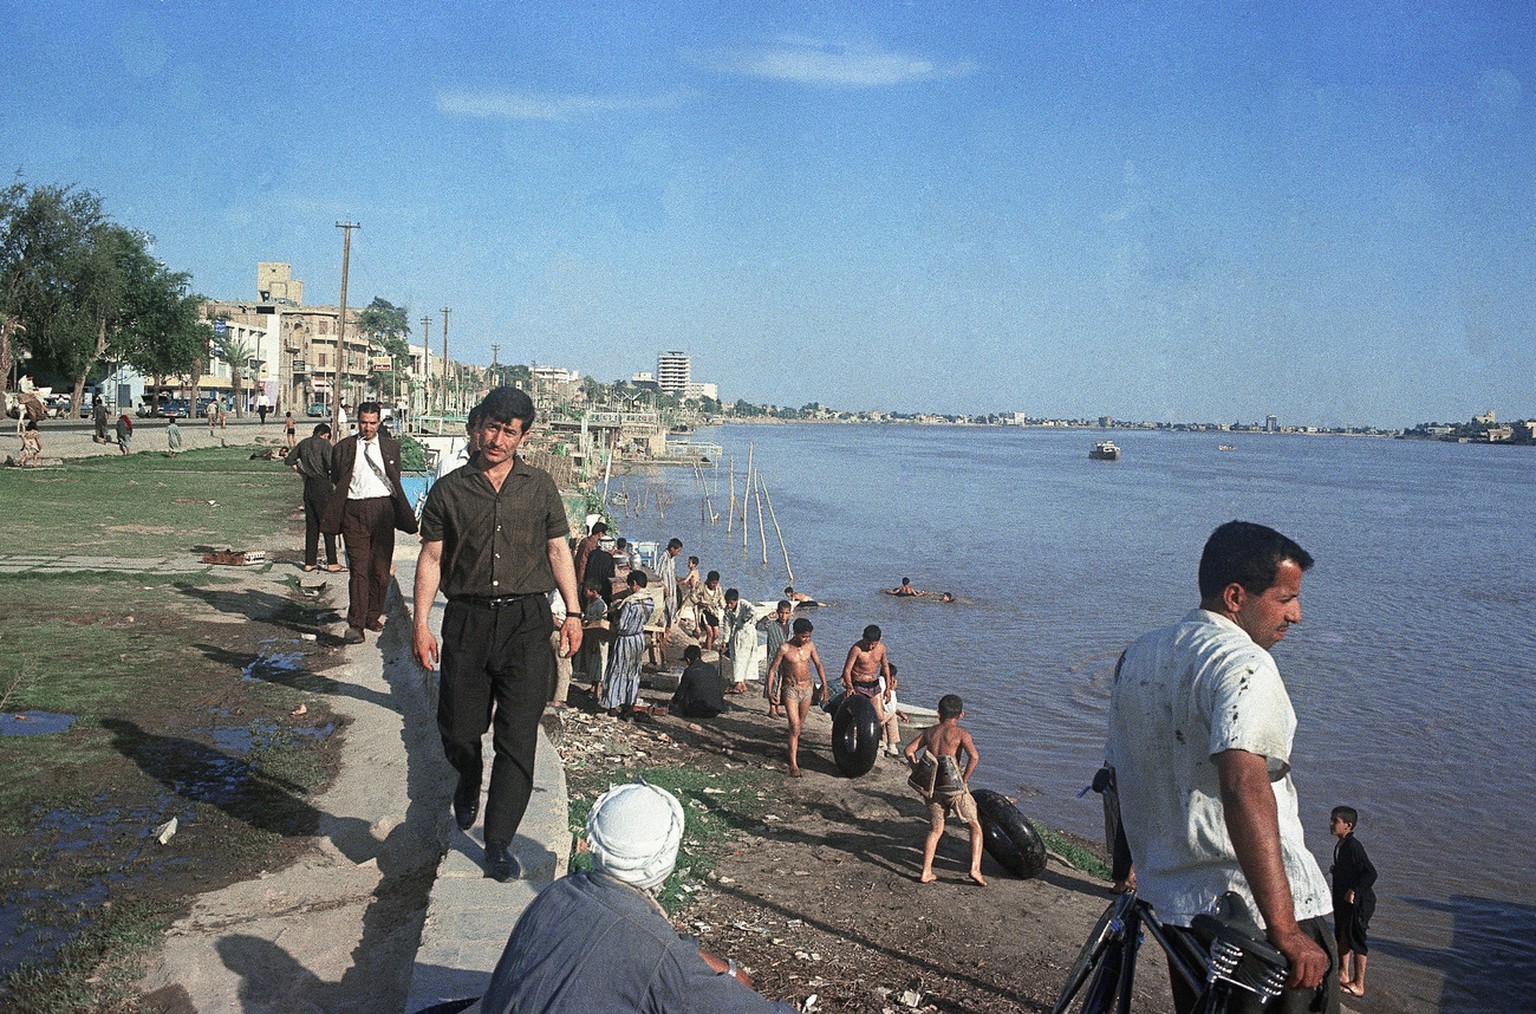 Children play in muddy water of Tigris in Iraq as adults stroll in afternoon sun, May 31, 1967. (AP Photo)